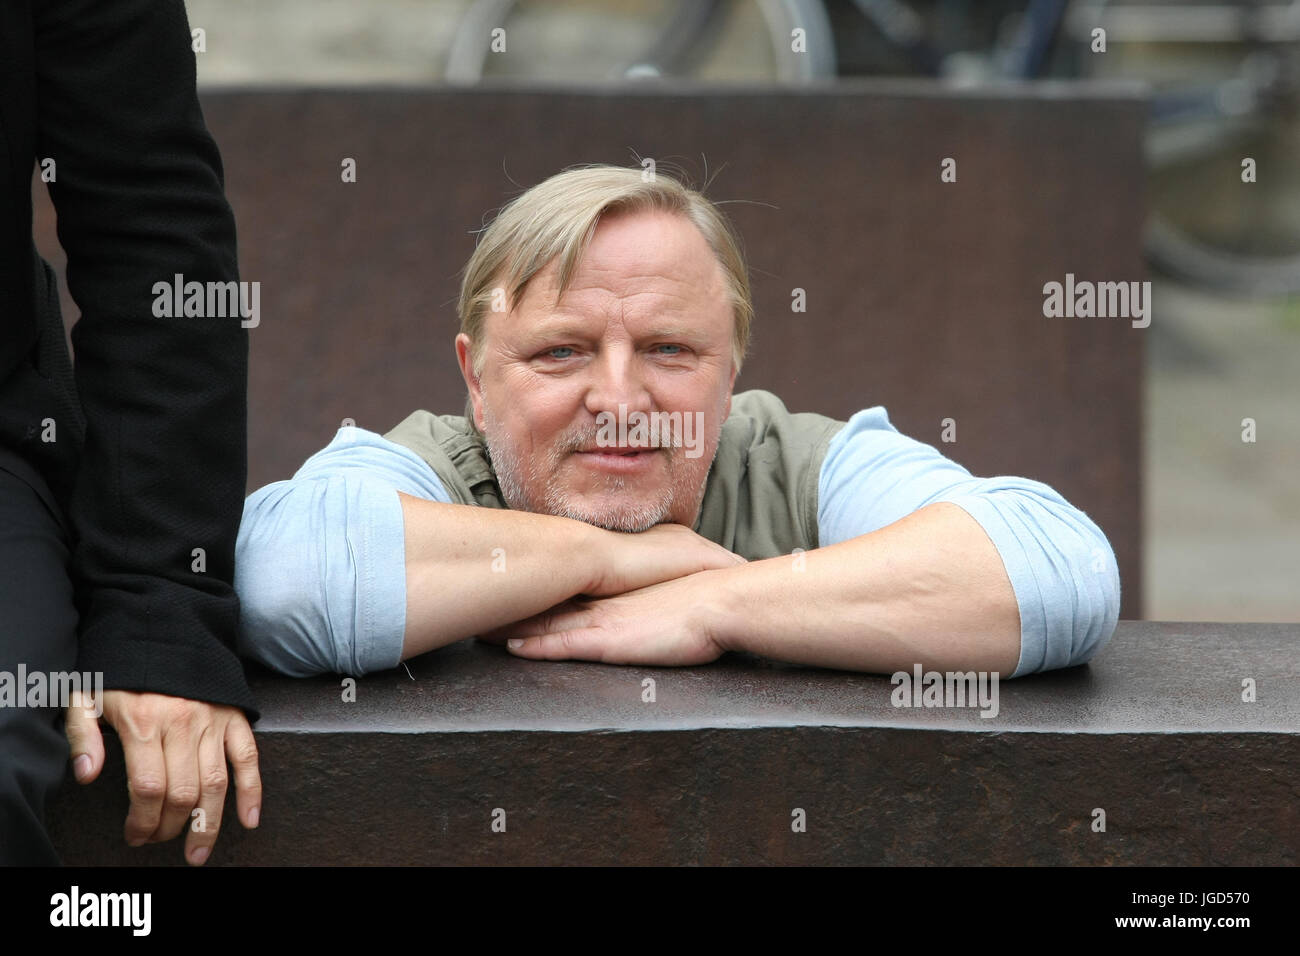 Muenster, Germany. 05th July, 2017. Actor Axel Prahl pose during a photocall on set of the WDR Tatort 'Gott ist auch nur ein Mensch' on July 5, 2017 in Muenster, Germany. Credit: Maik Boenisch/Pacific Press/Alamy Live News Stock Photo